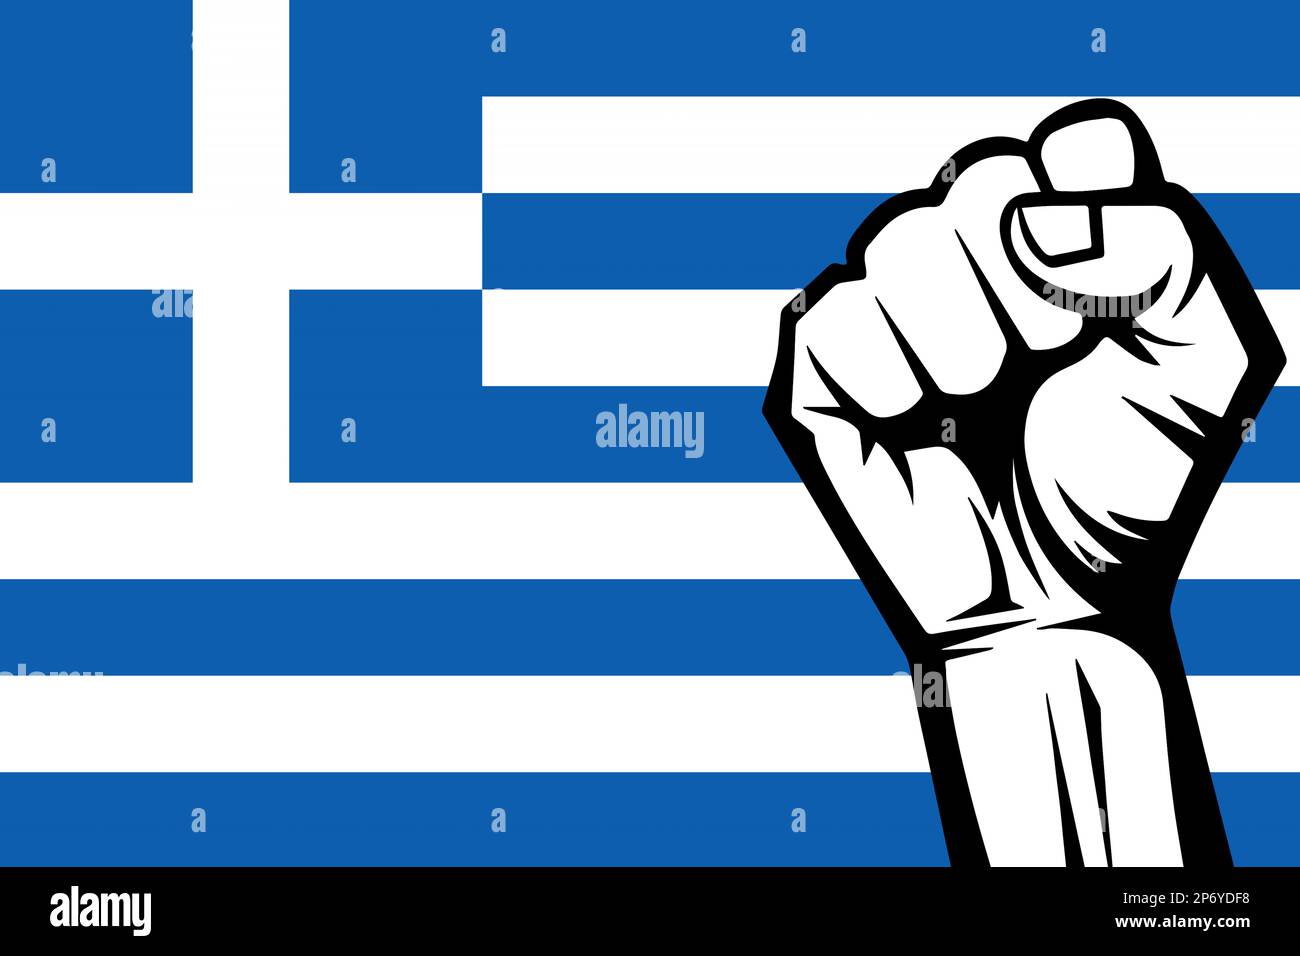 Protest in Greece. Rally in Greece. Greece flag and silhouettes with fists Stock Photo